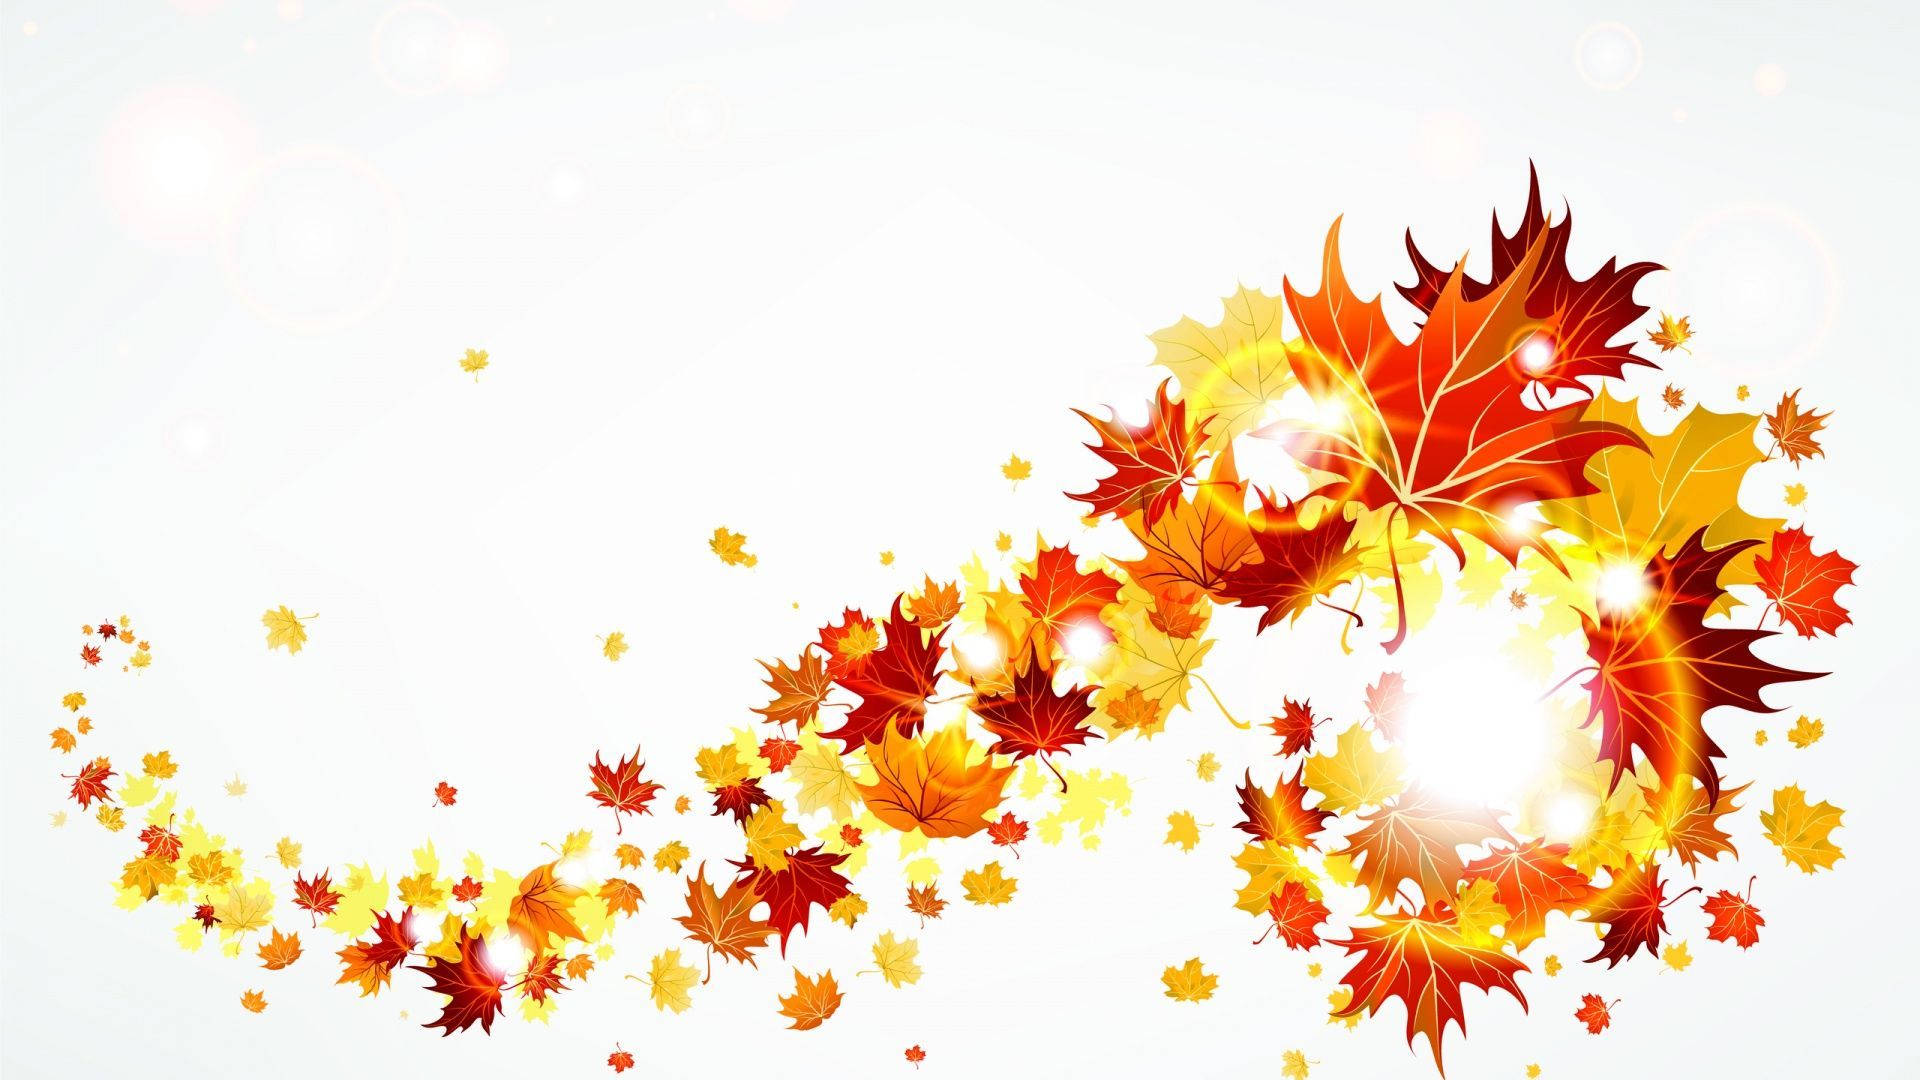 Autumn Maple Leaves Clipart Background